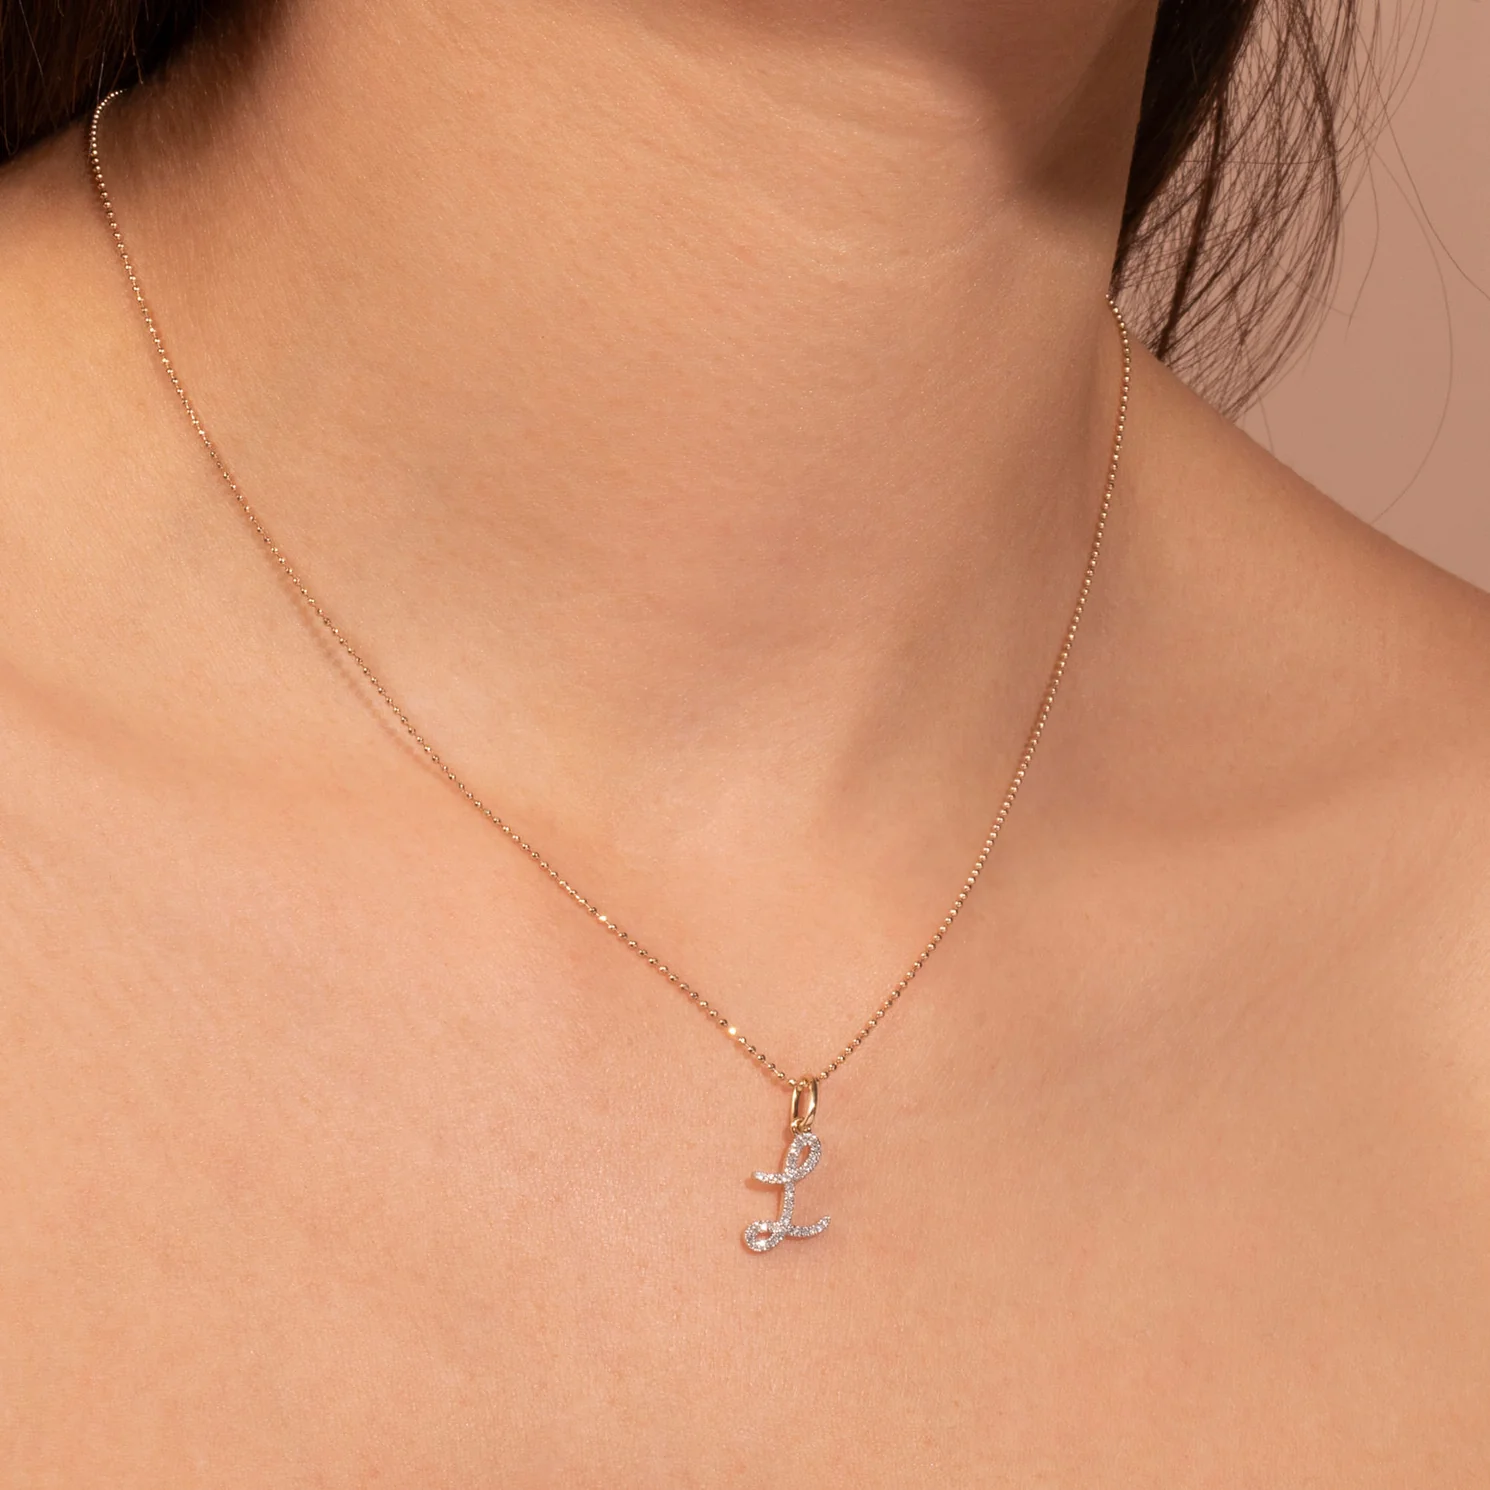 large pave scripted initial necklace on the neck